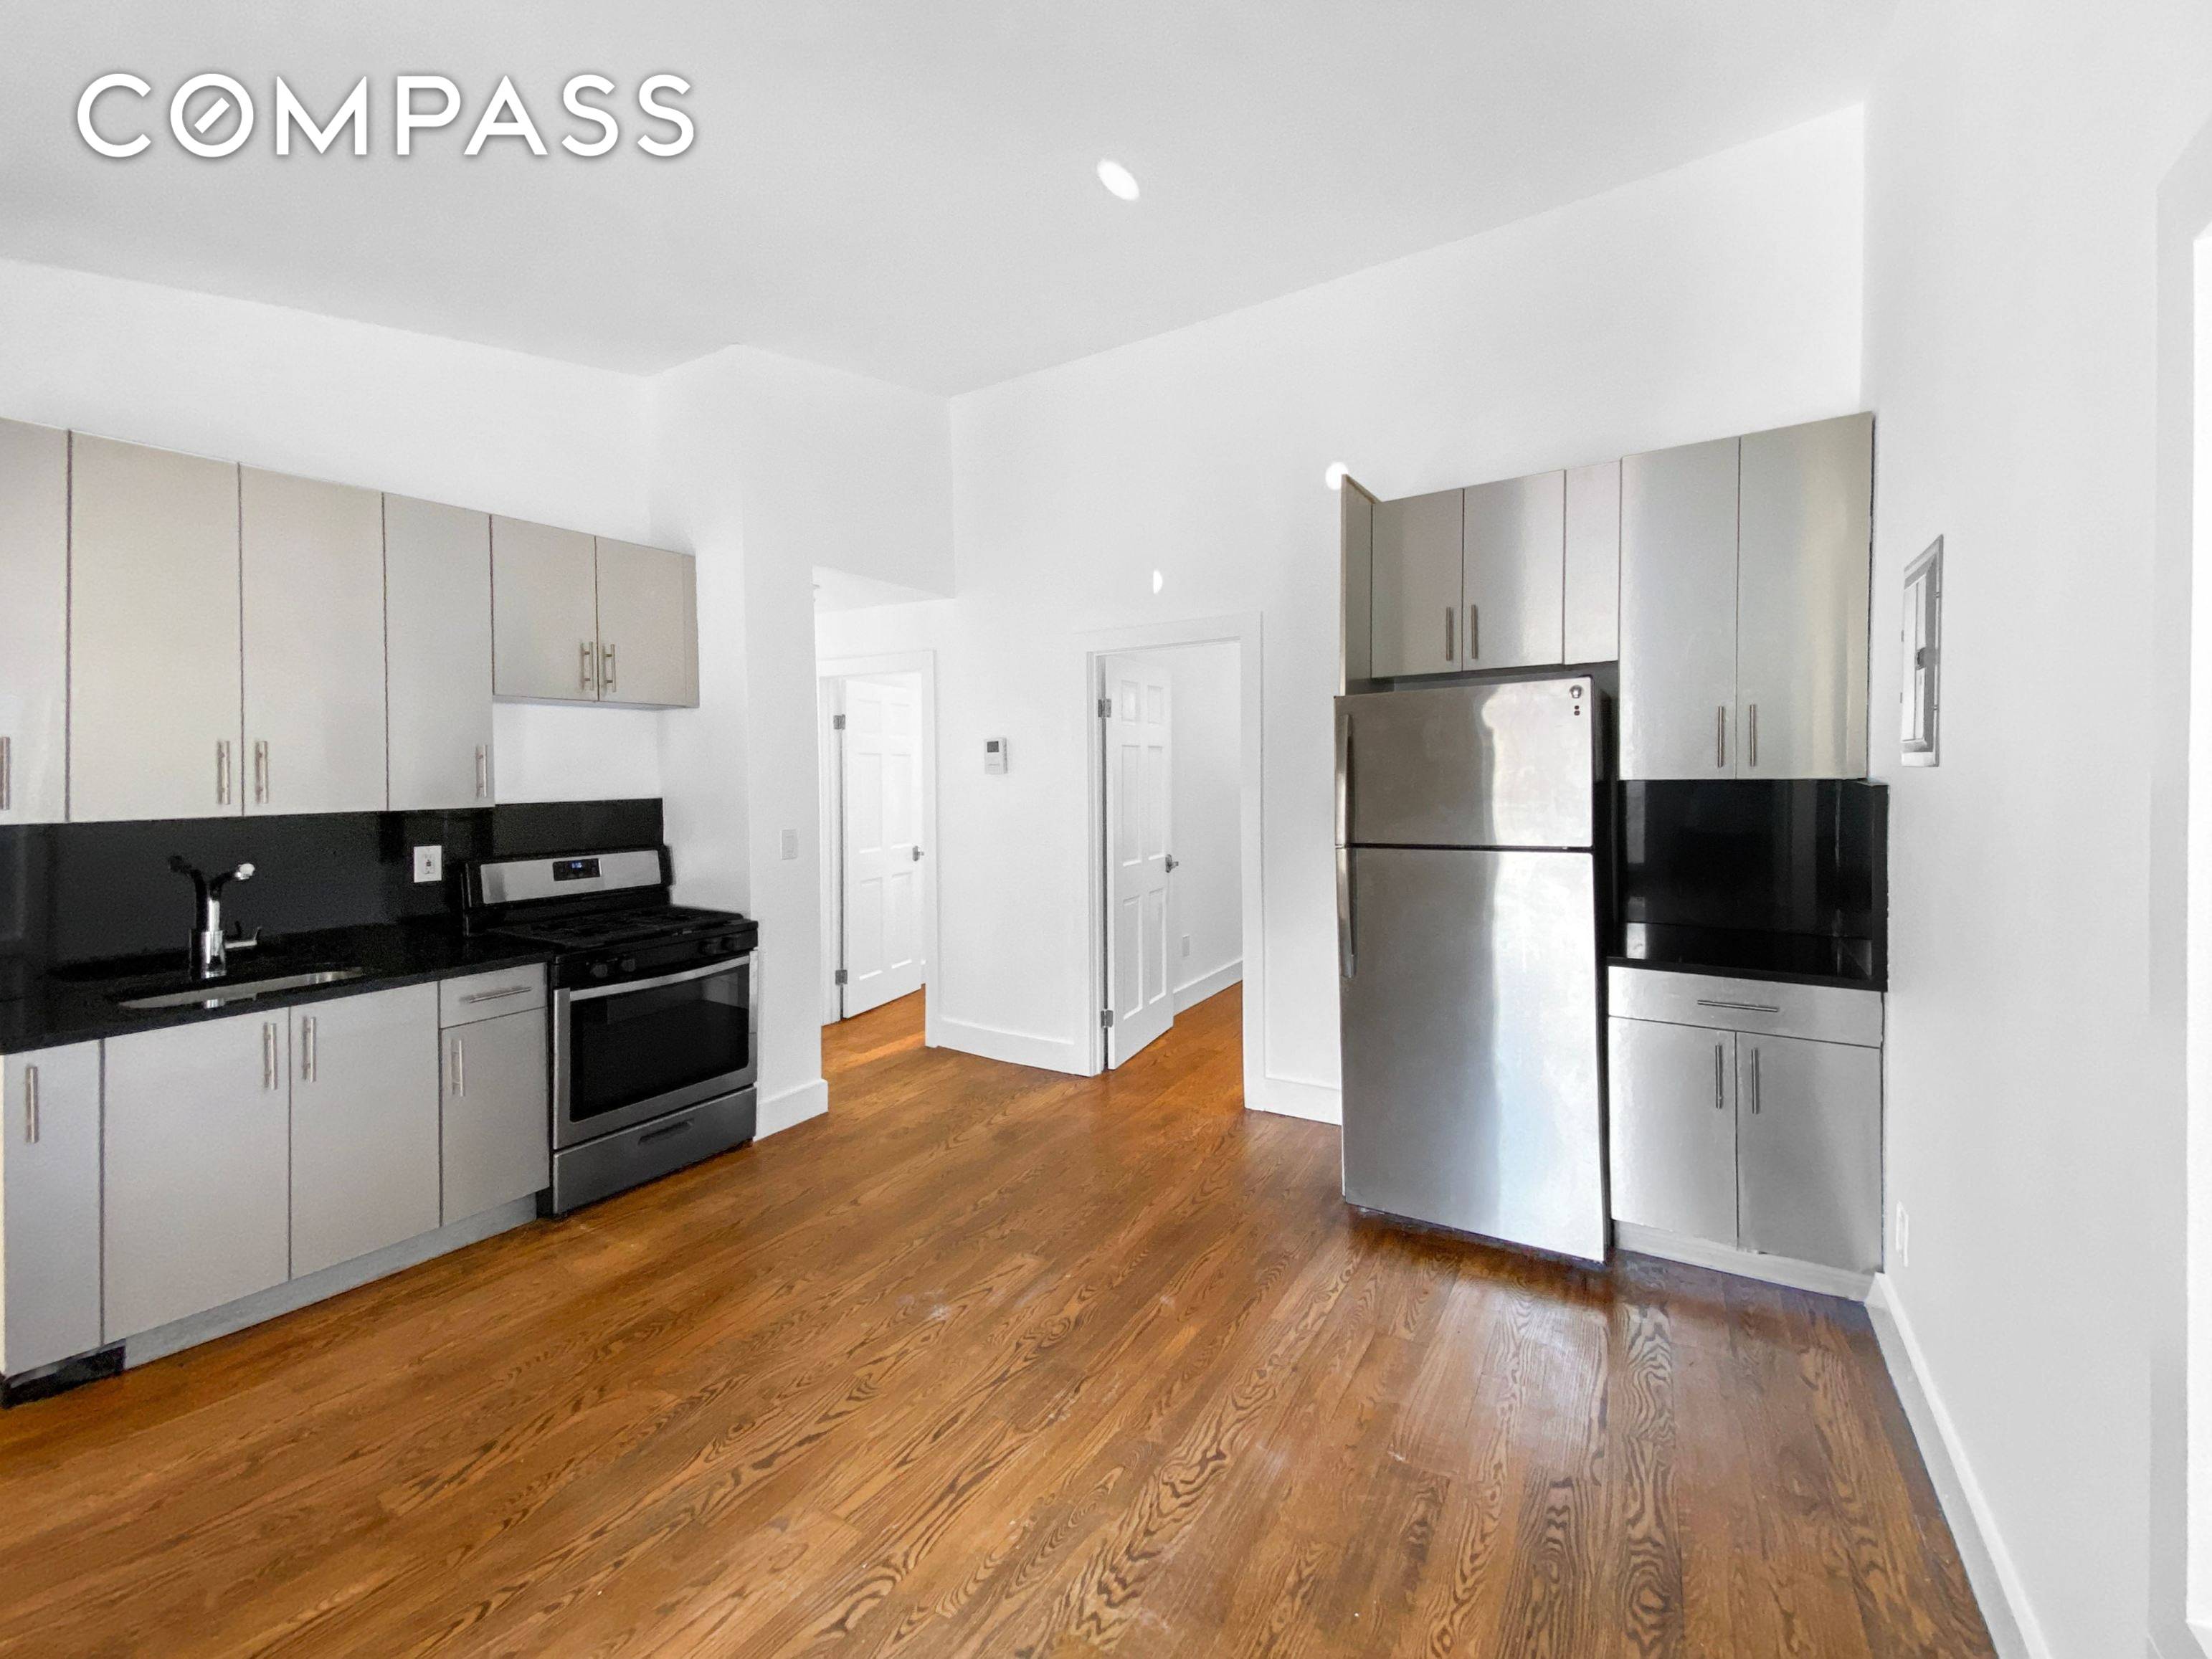 Welcome to 583 Hart St. 583 Hart is a 2 unit multifamily located in an incredible Bushwick location.